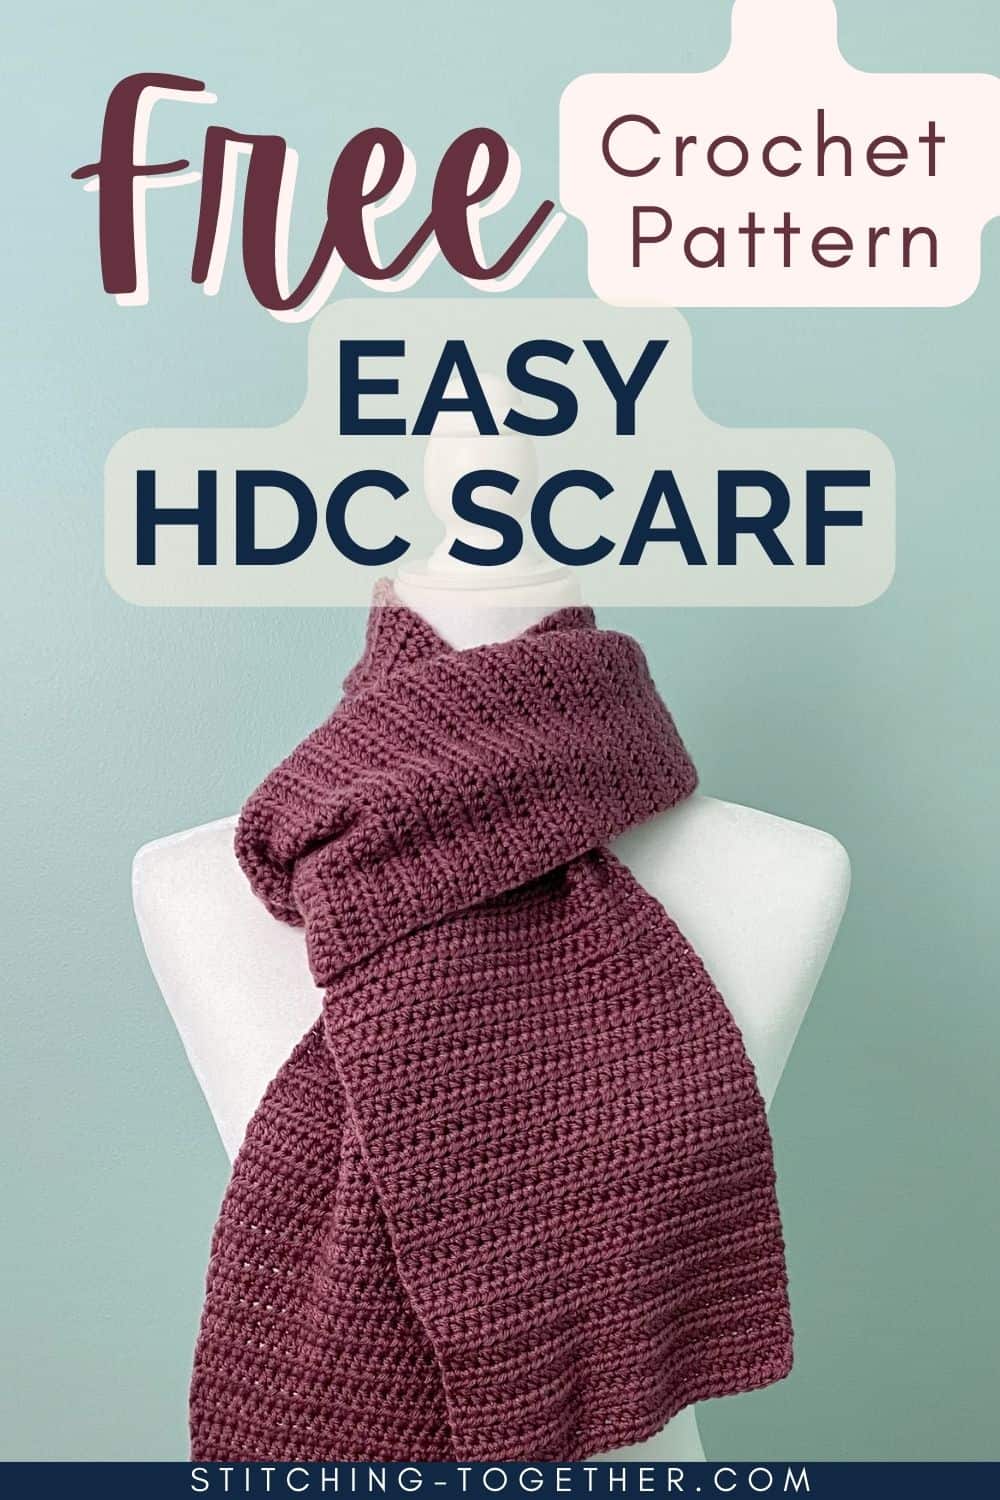 graphic reading free crochet pattern easy hdc scarf with scarf image in the background